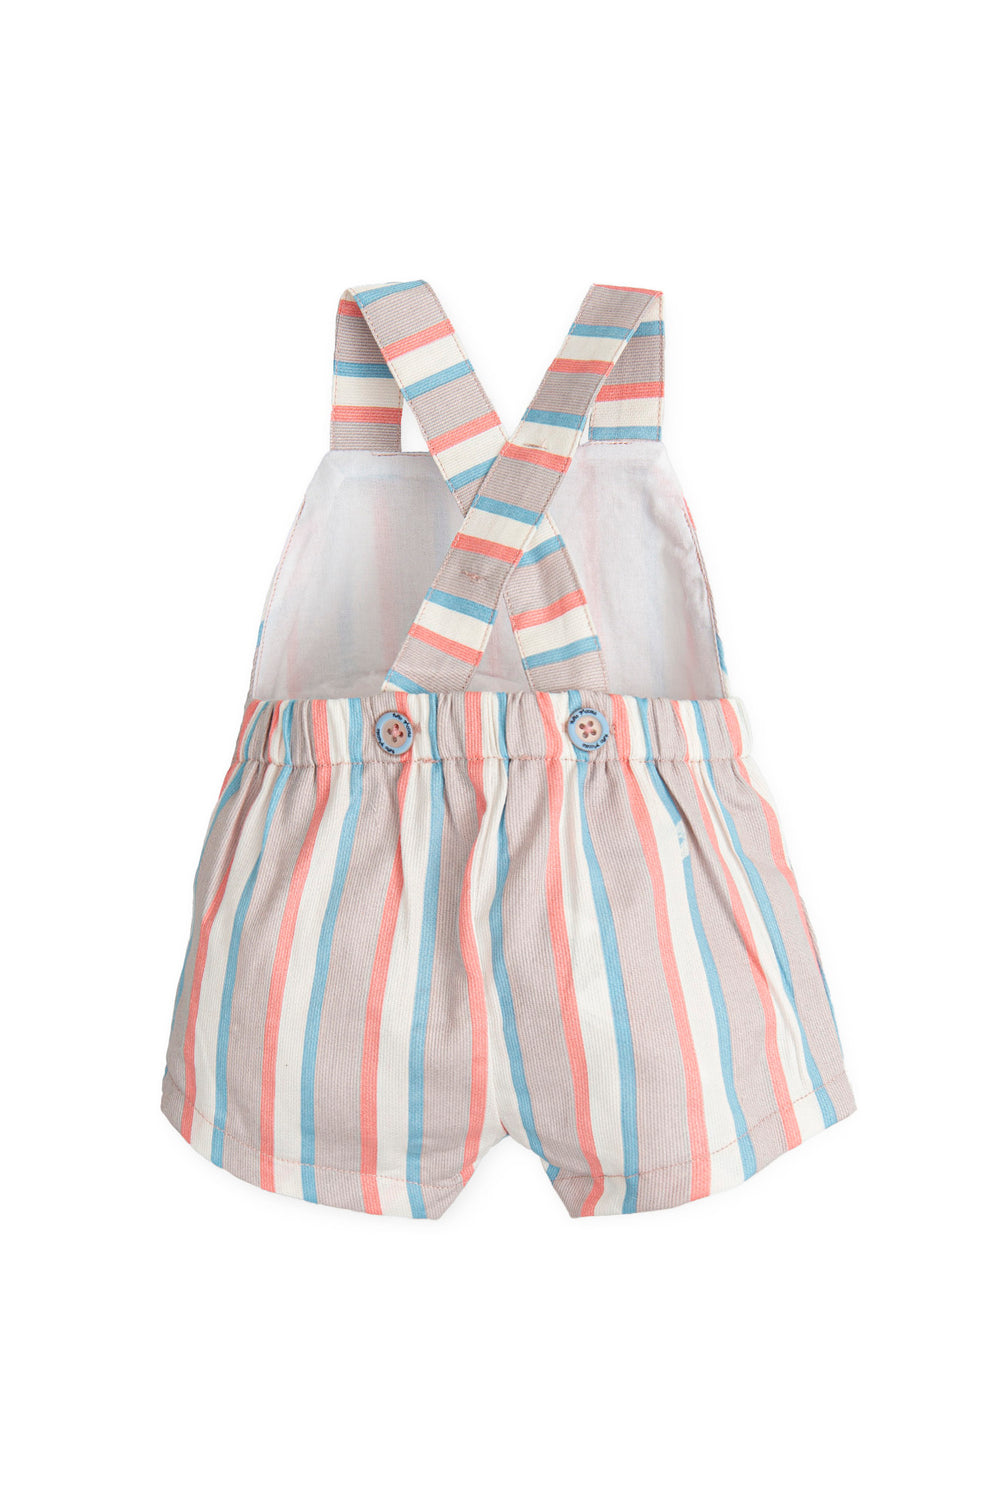 Tutto Piccolo "Edward" Beige, Coral & Blue Striped Dungarees | Millie and John